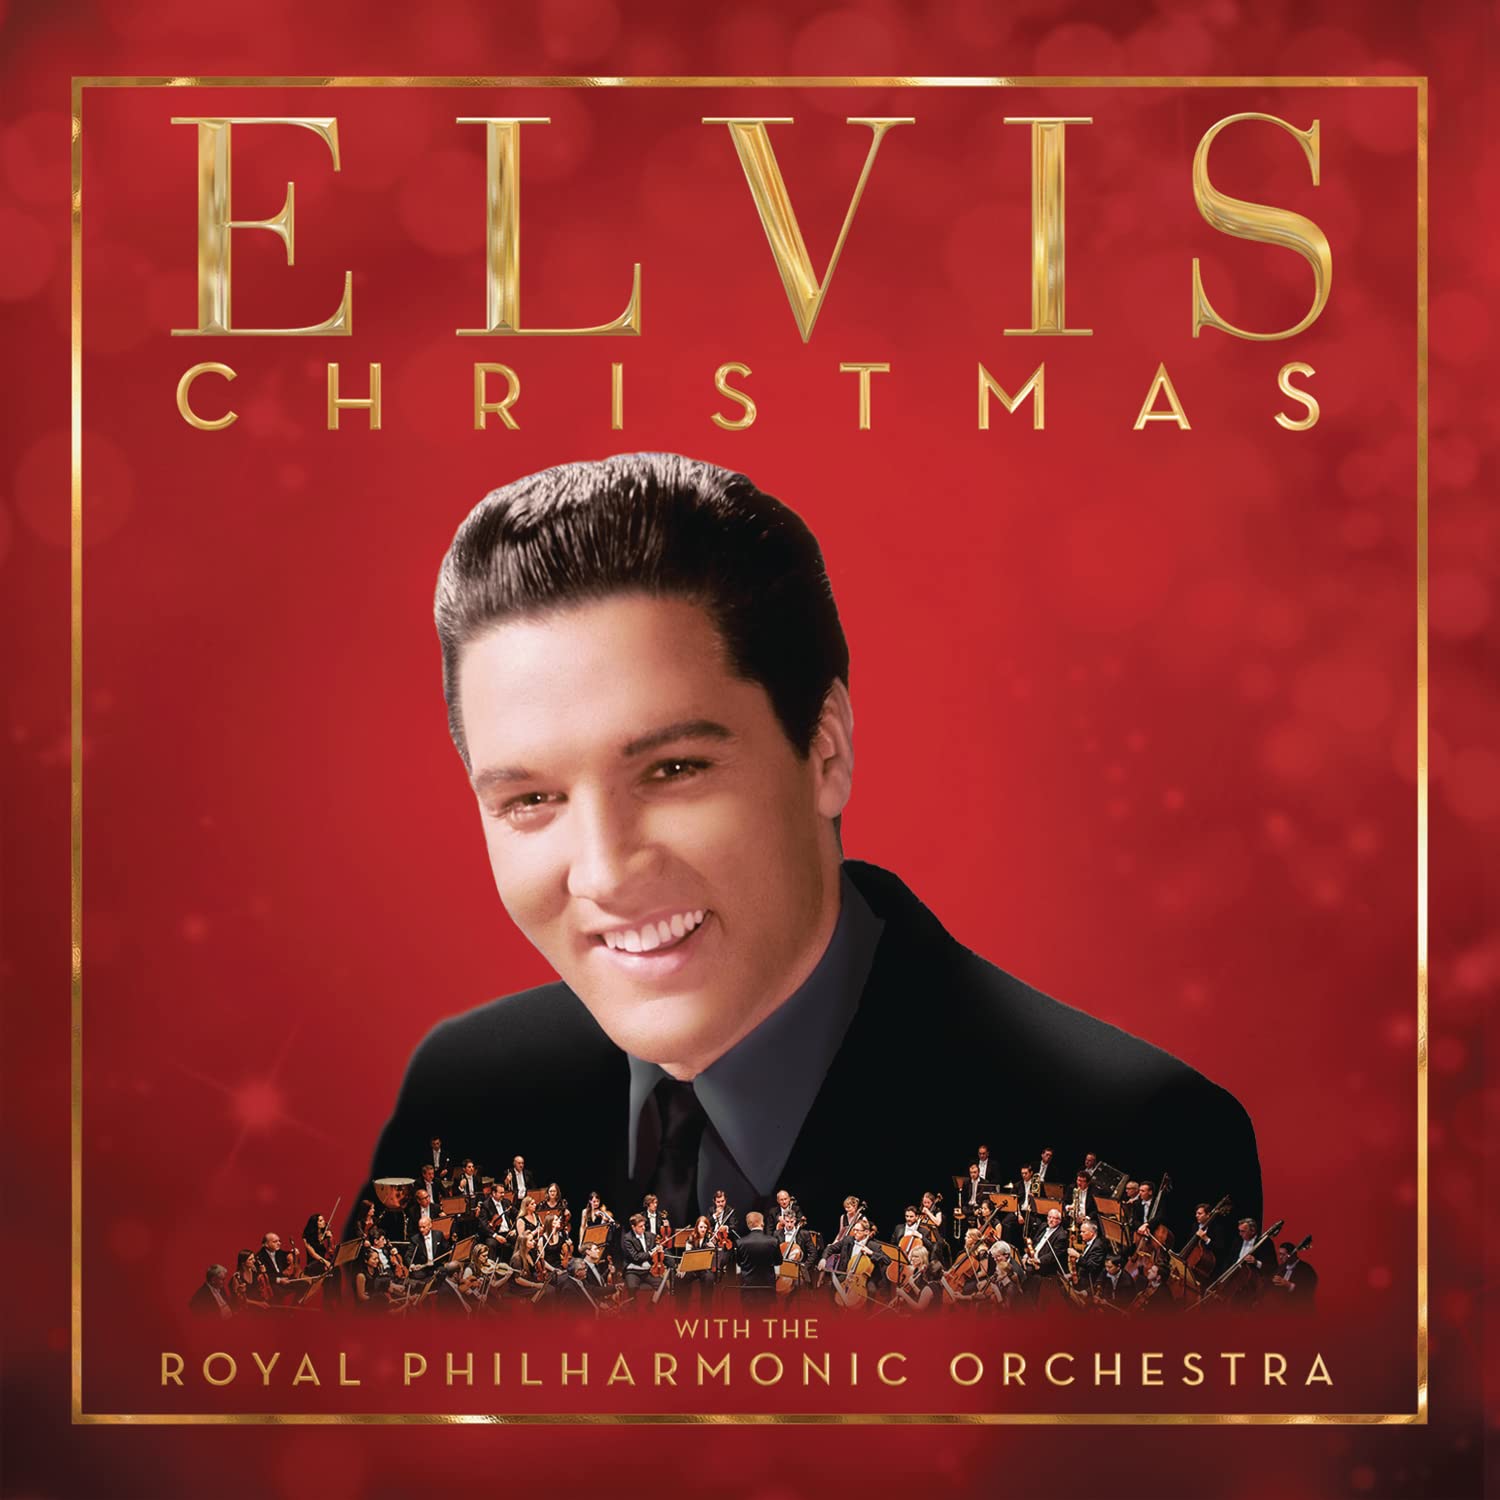 Elvis Presley - Christmas with the Royal Philharmonic Orchestra - Deluxe Edition